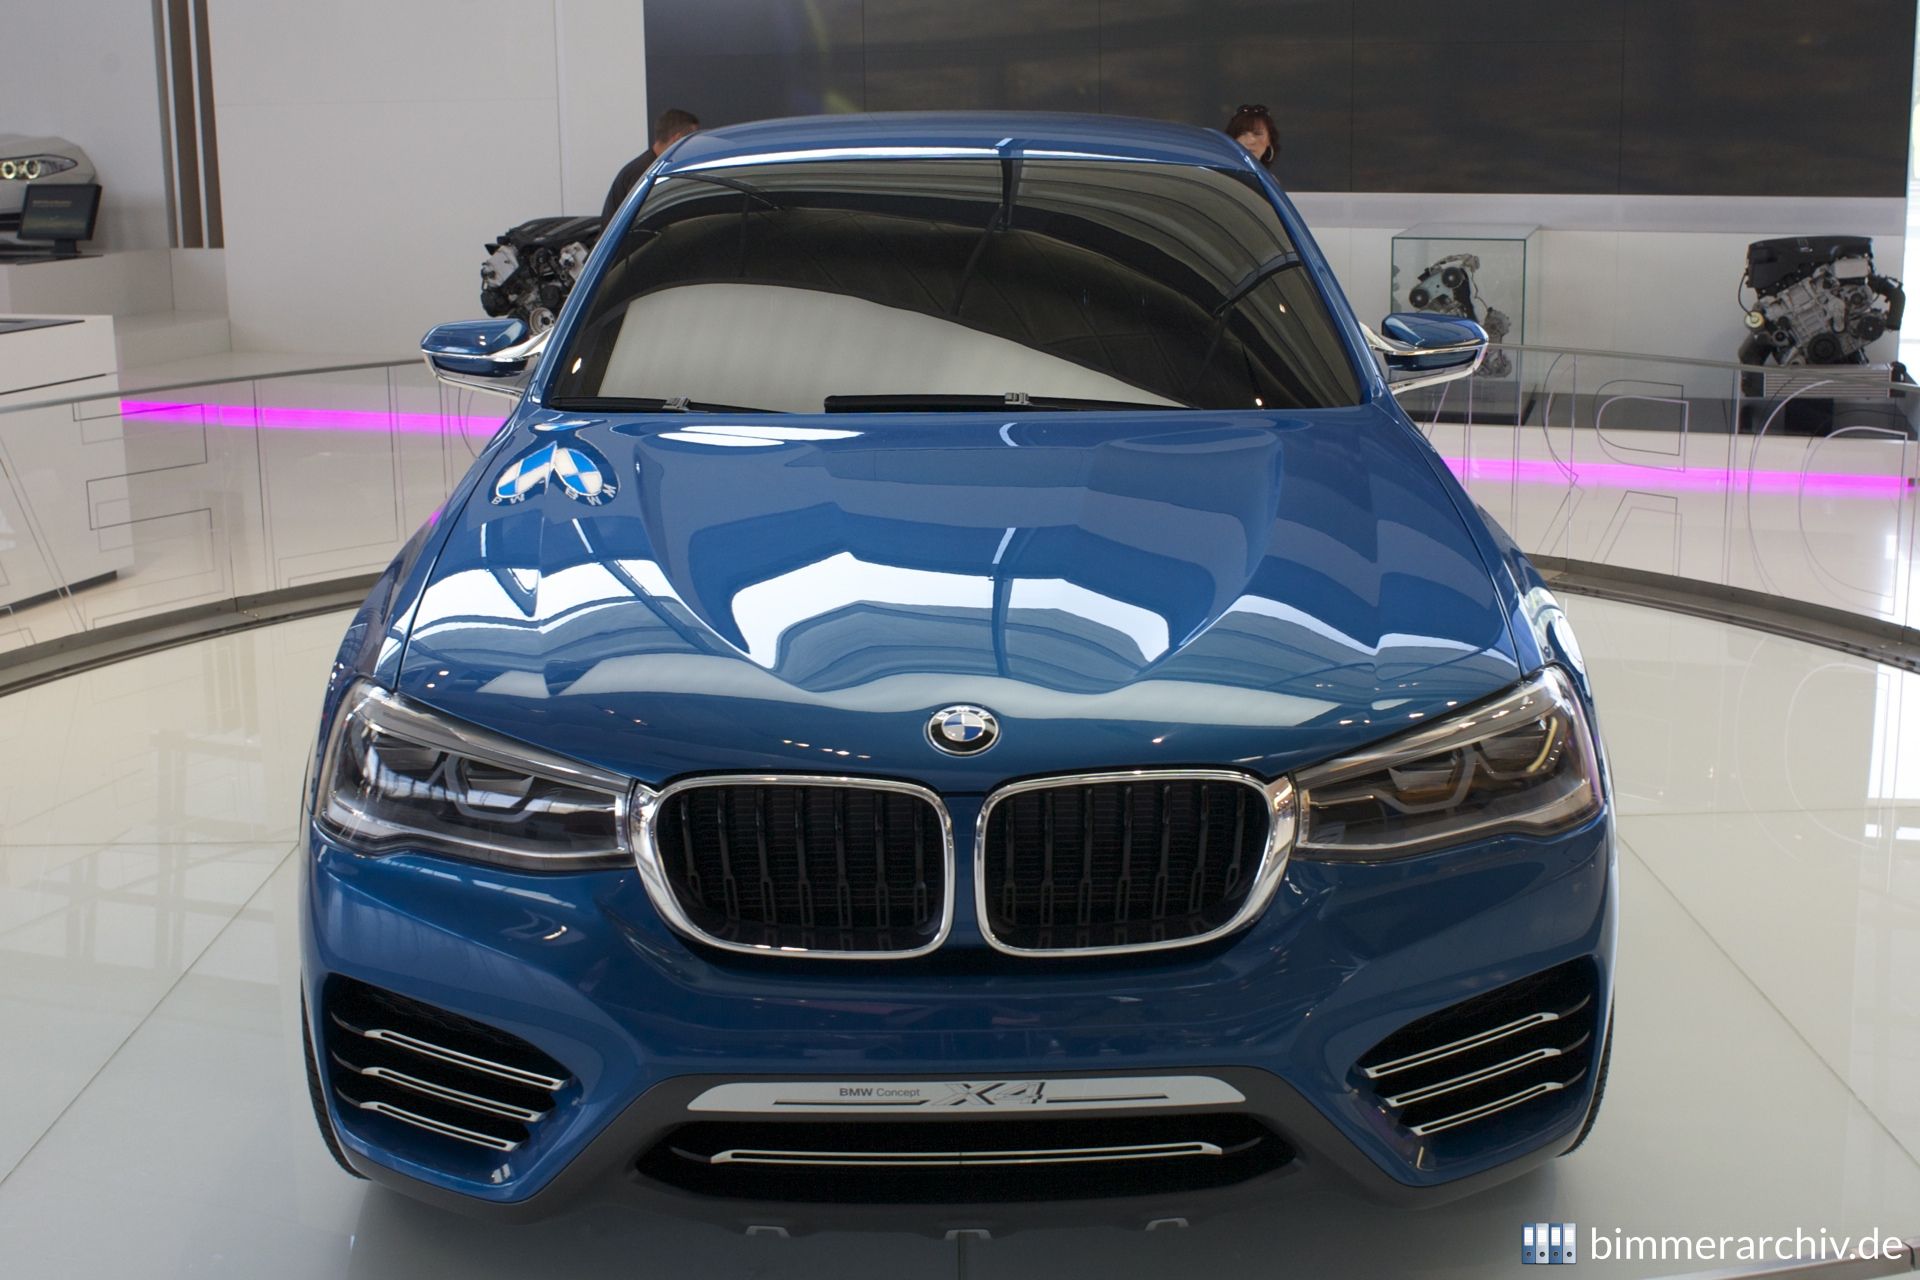 BMW Concept X4 in the BMW Welt